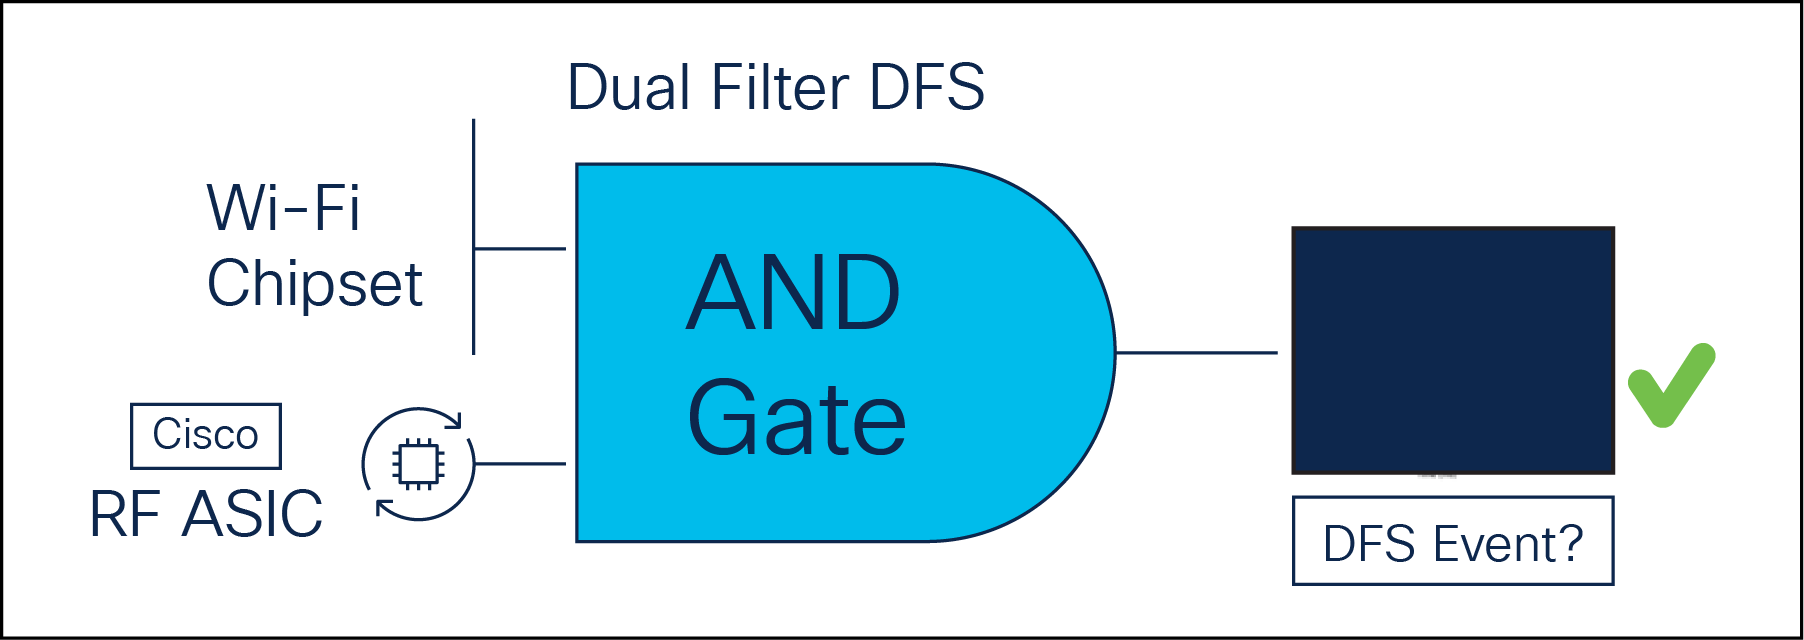 DFS event (detected by Wi-Fi chipset) is compared to RF ASIC to verify it is indeed a real DFS event